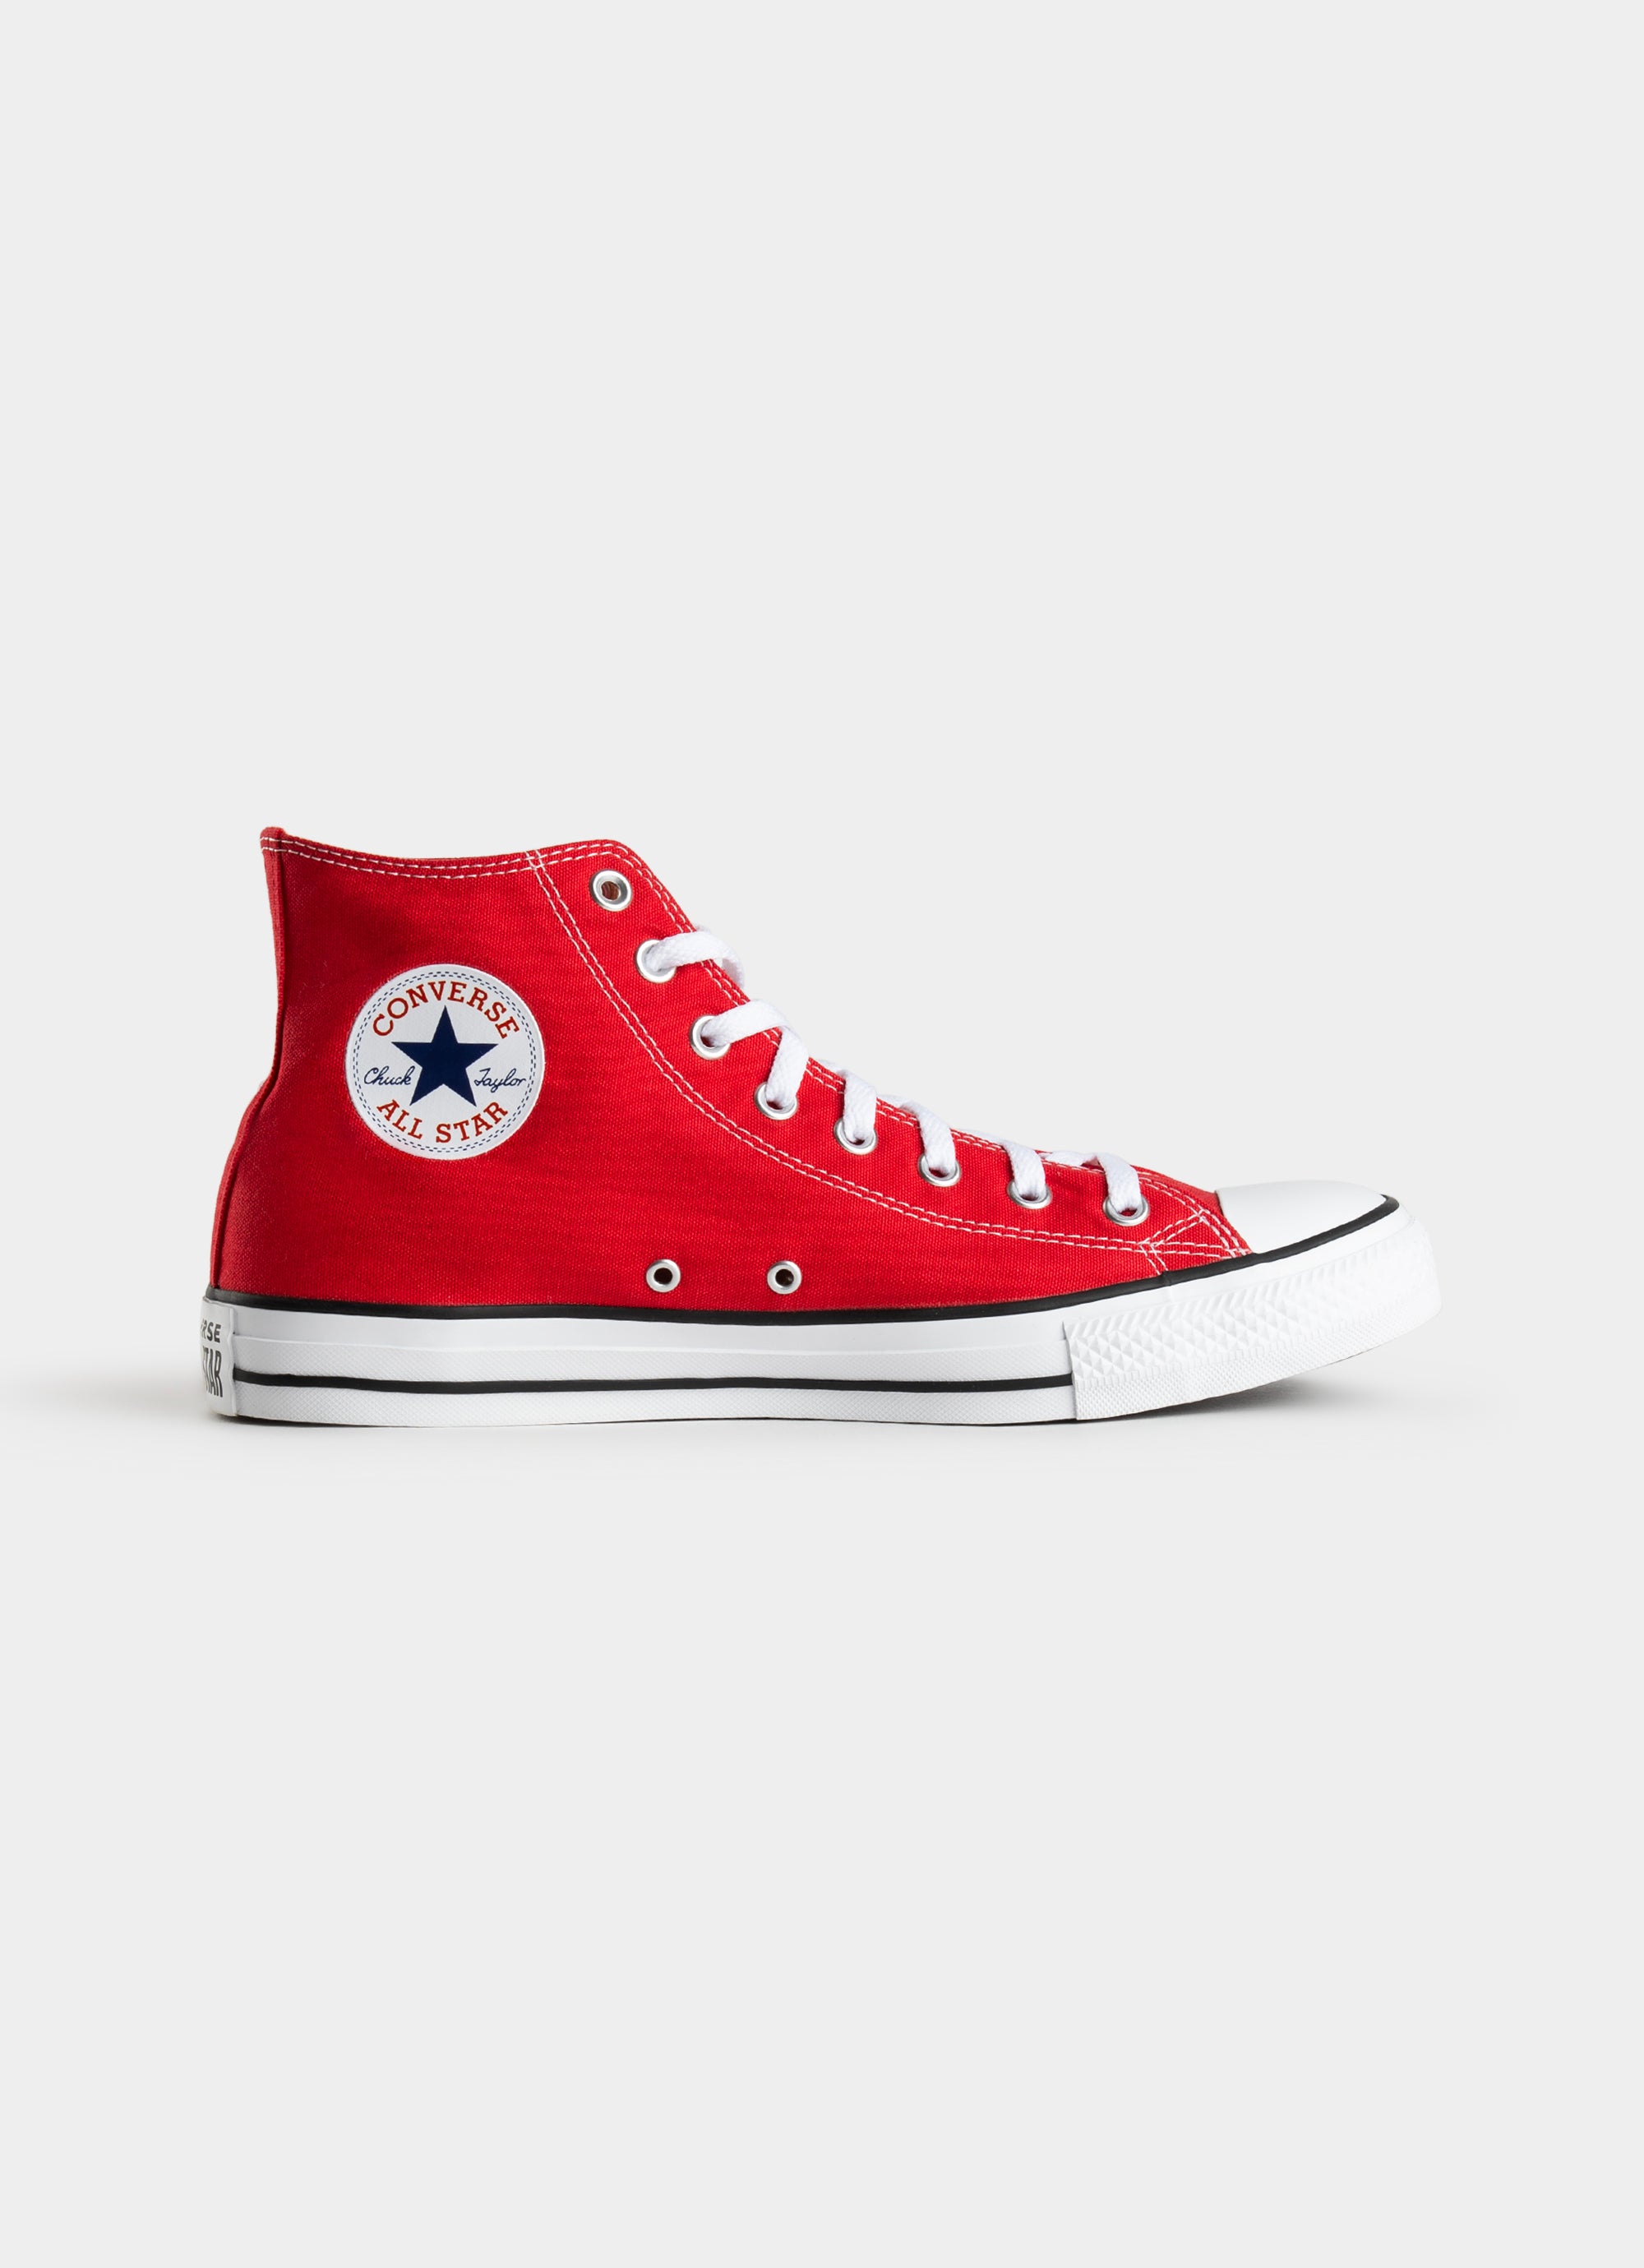 Converse Chuck Taylor All Star High Shoe | Red Rat